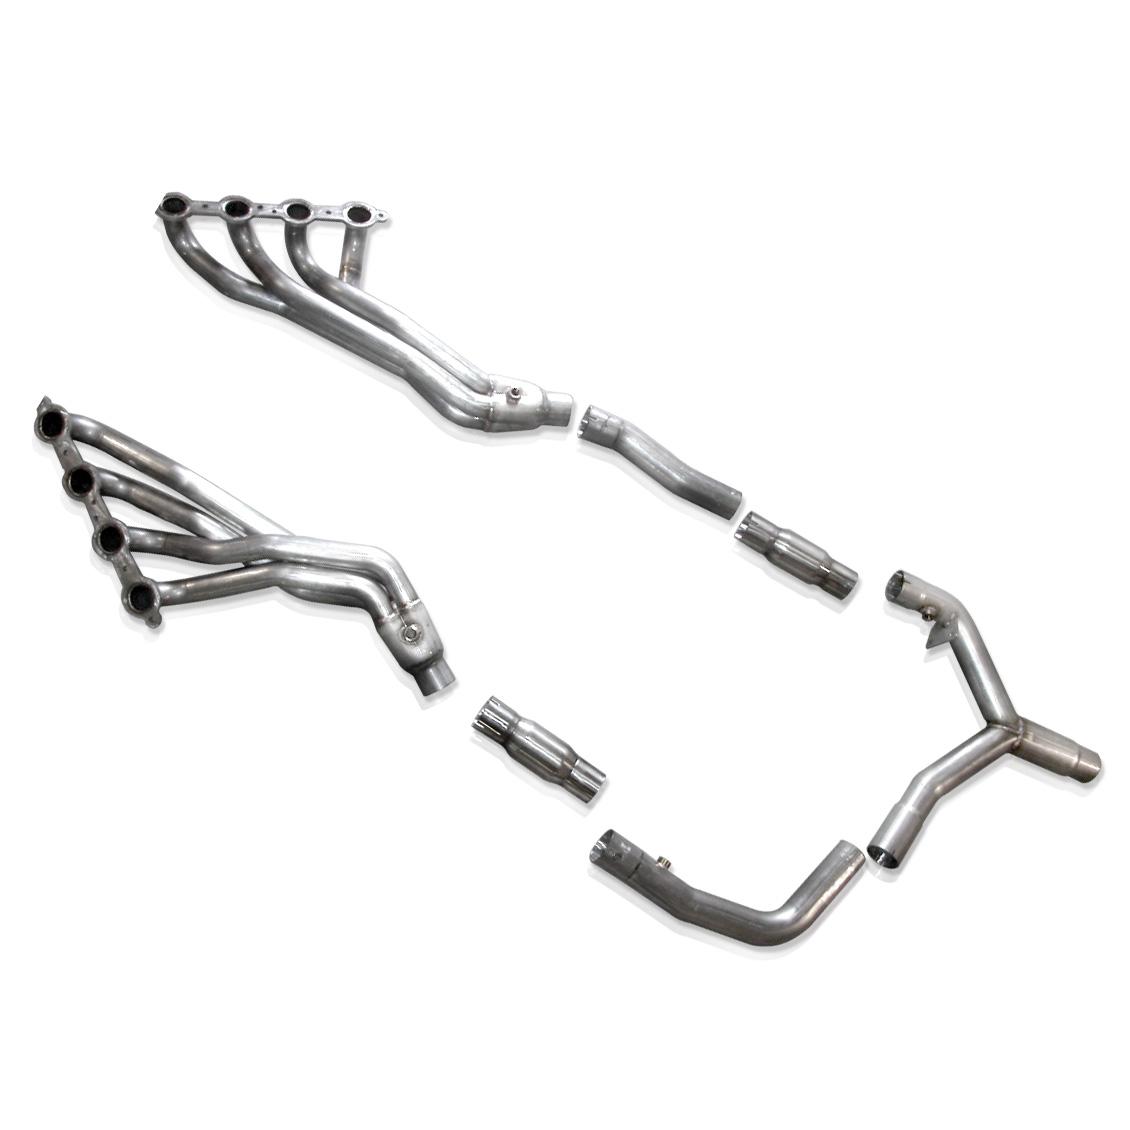 2000 LS1 Fbody Stainless Works Long Tube Headers with High Flow 2.5" Catted Ypipe